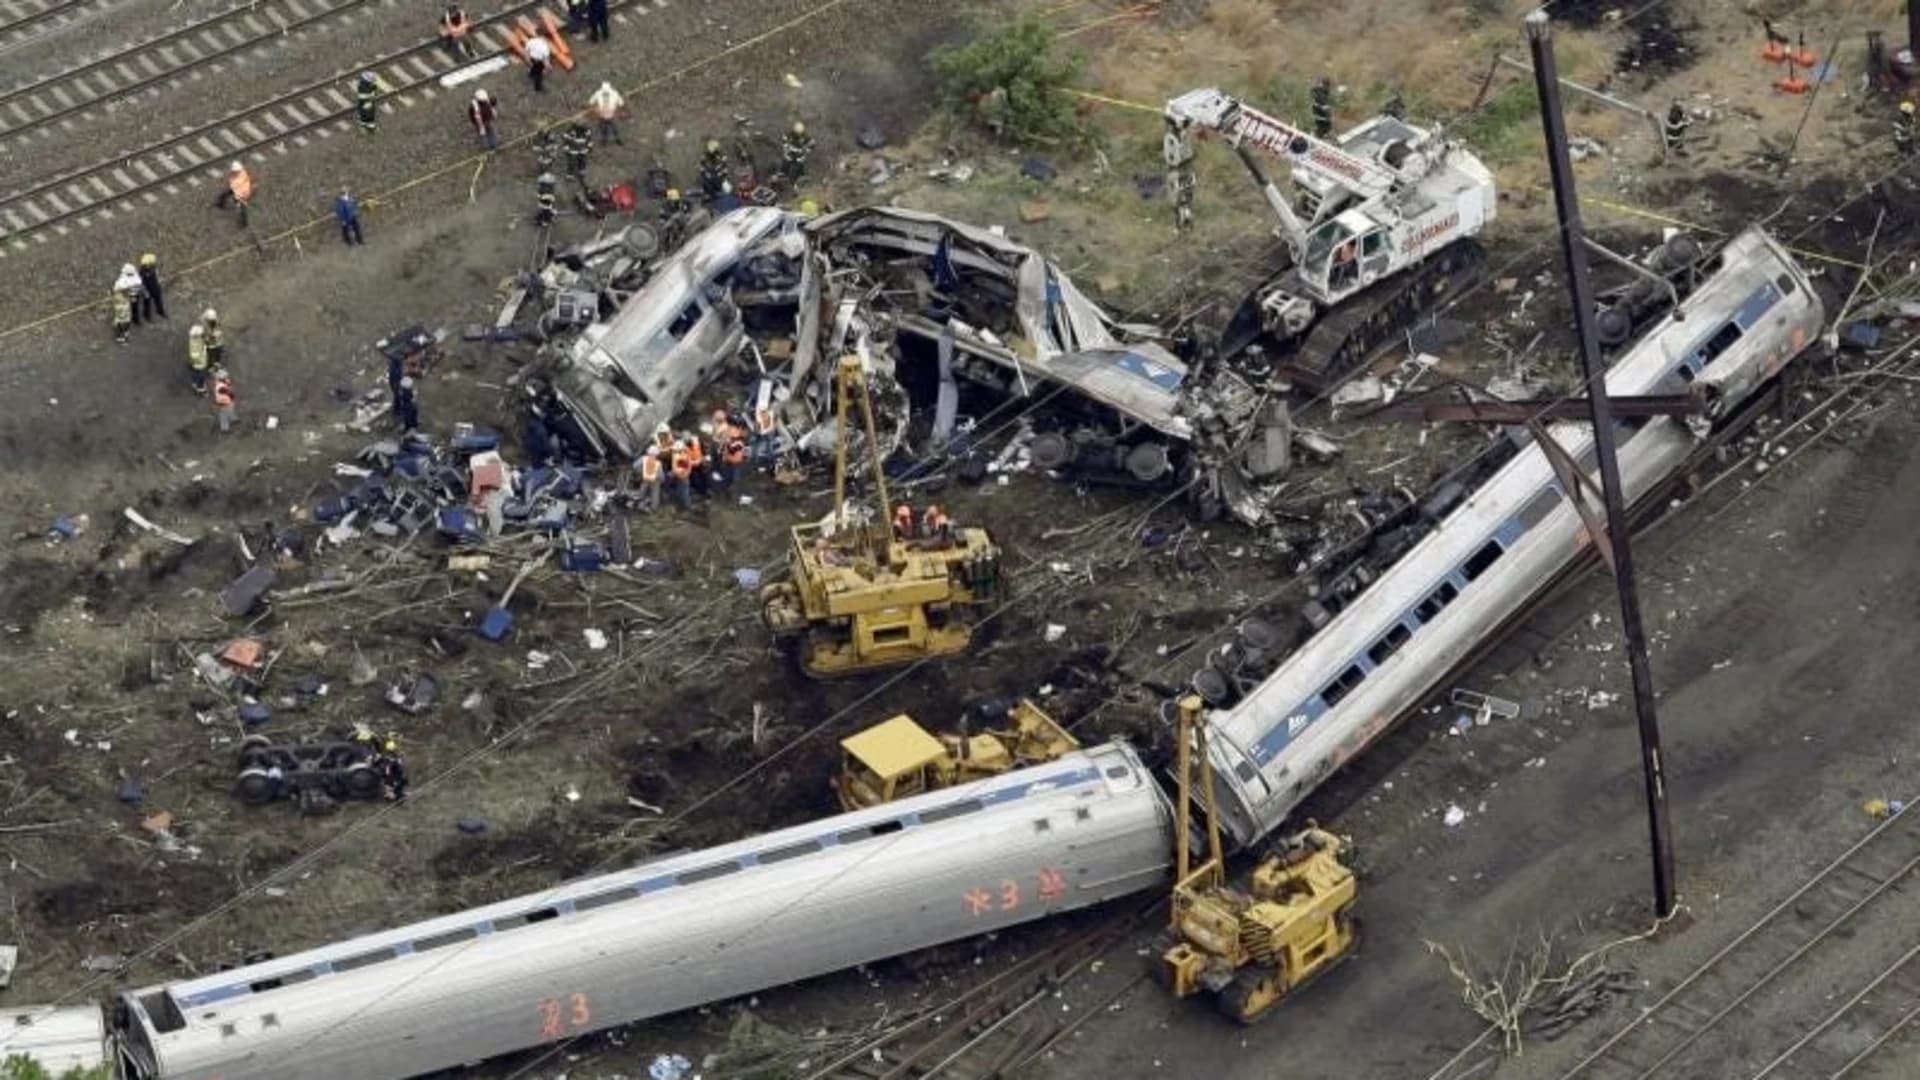 Judge orders charges filed against Amtrak engineer in deadly Philadelphia derailment